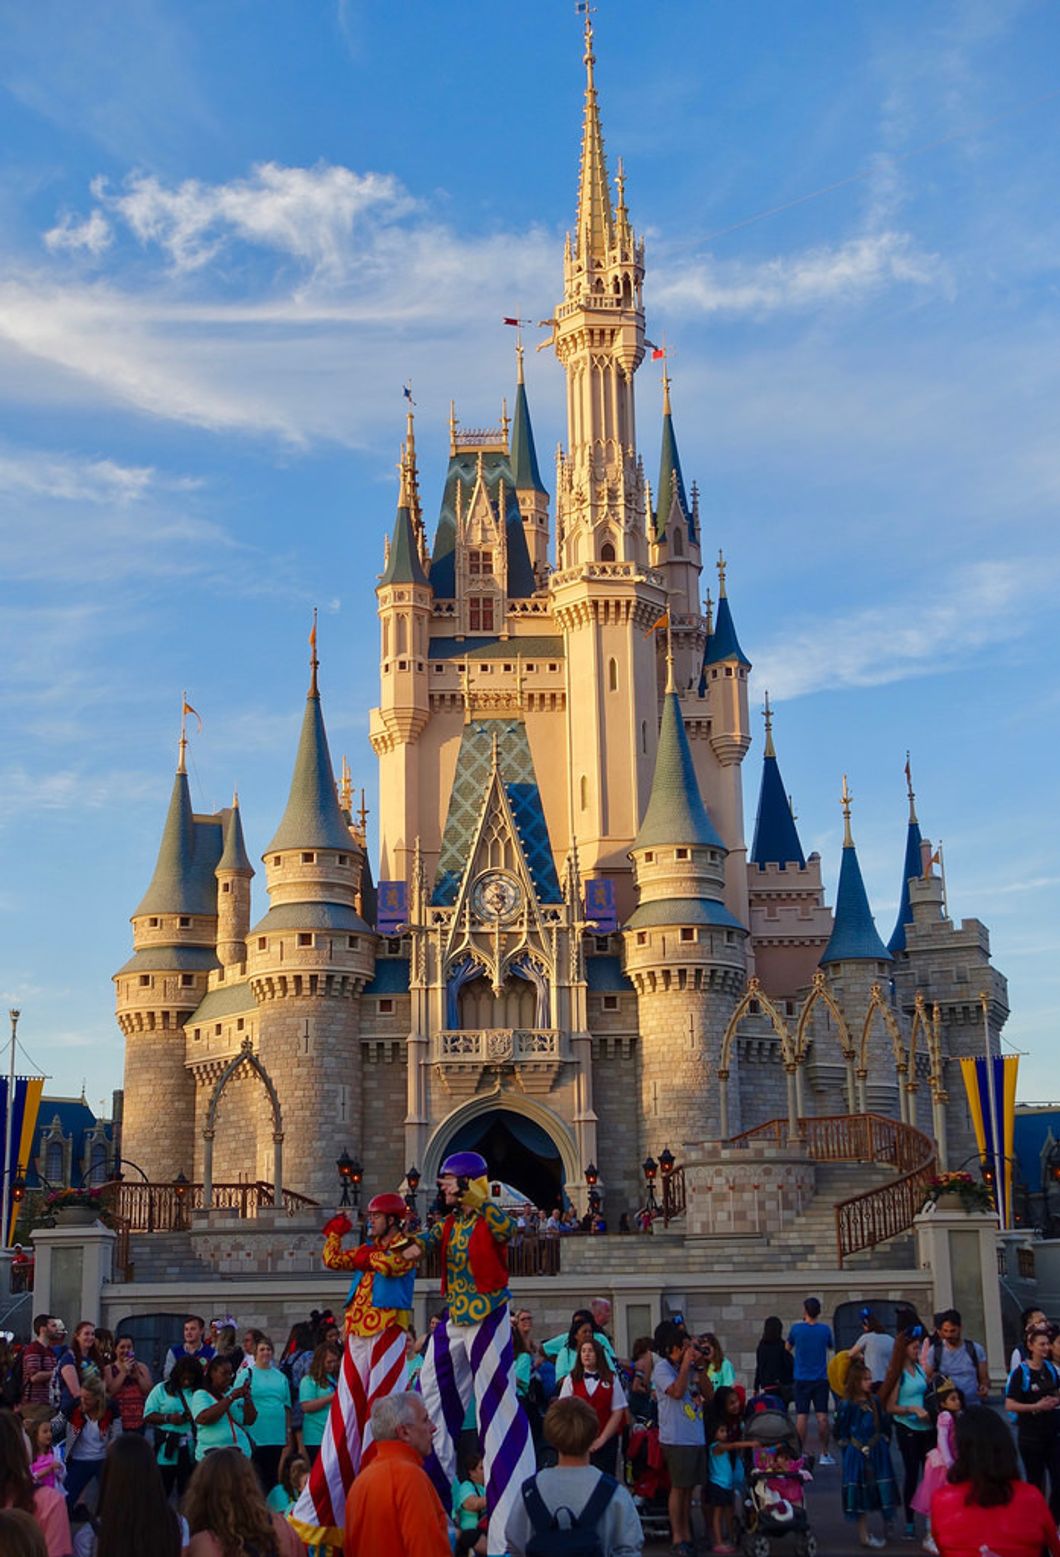 8 Rides at Disney World That You Have To Ride Or Else Your Trip Is Incomplete